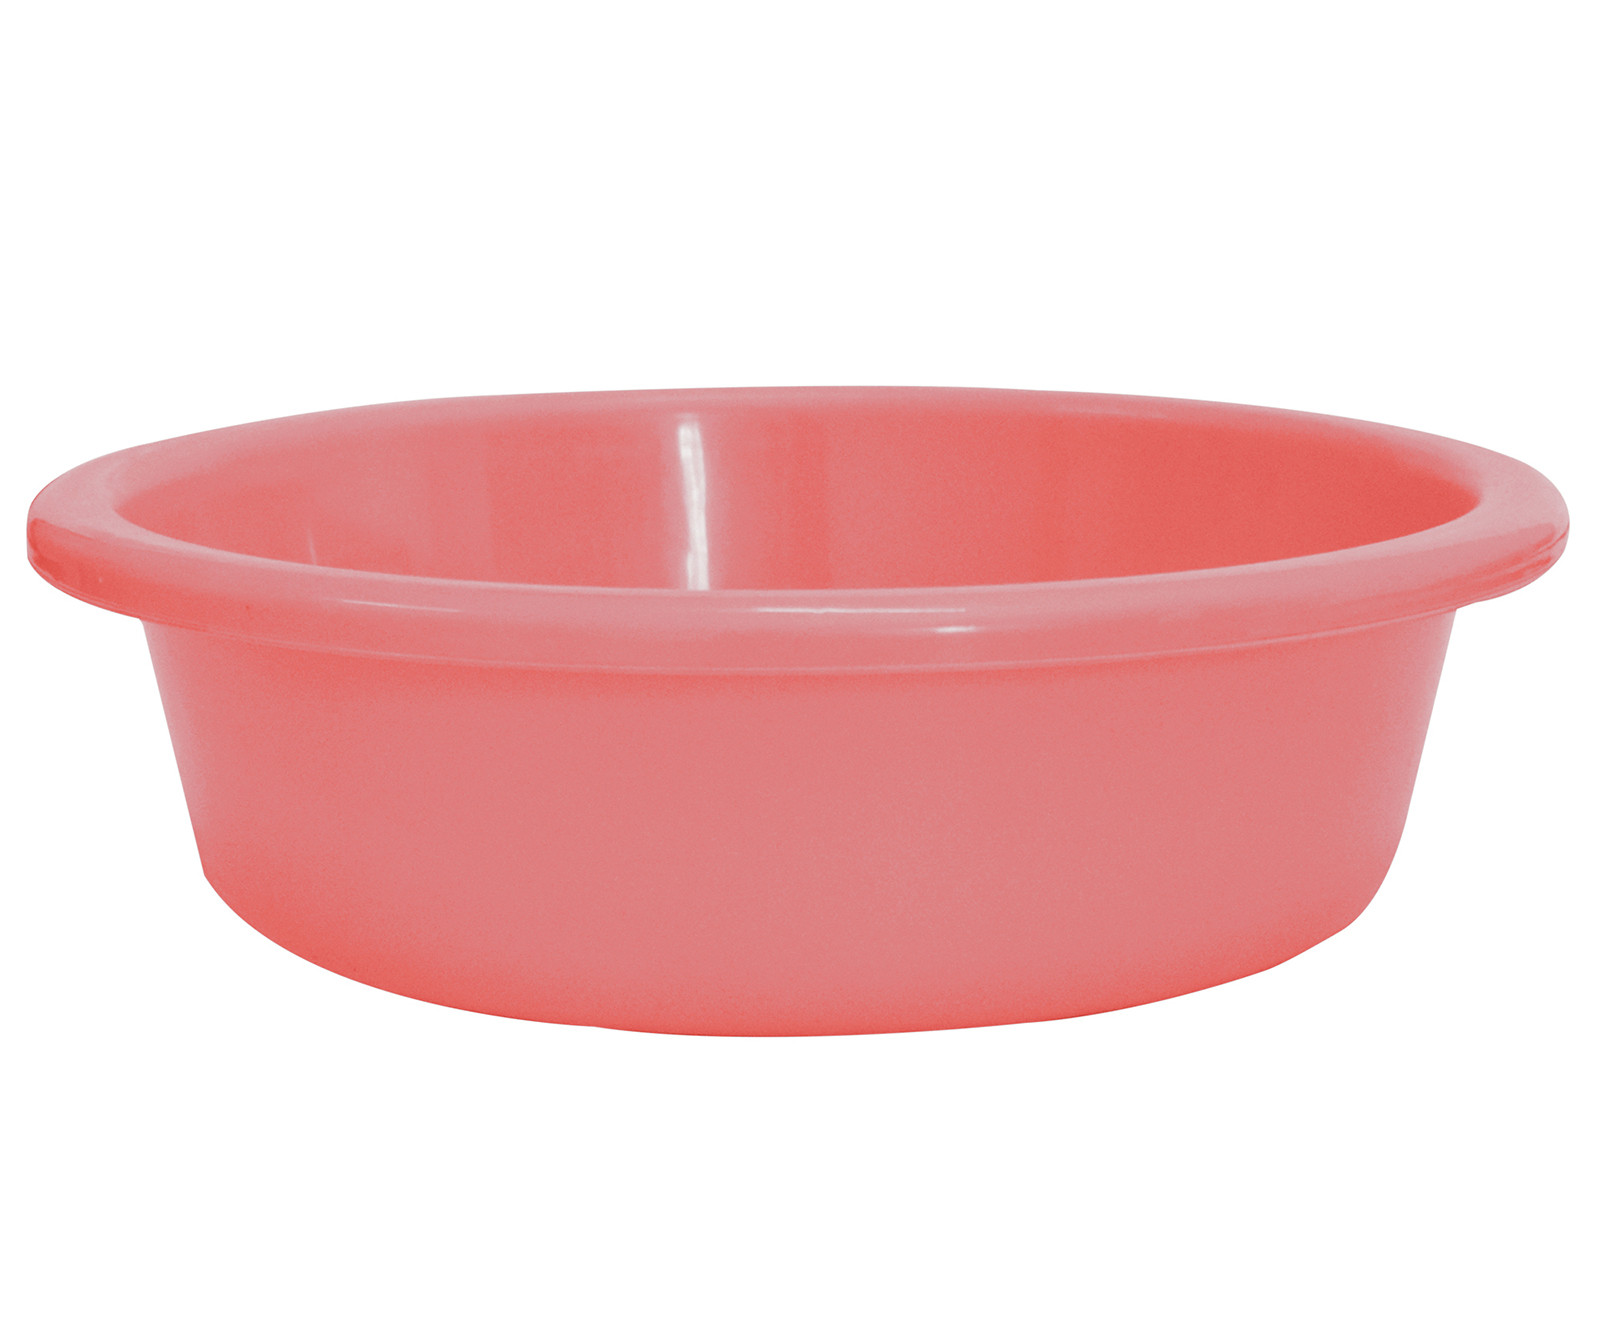 Kuber Industries Multiuses Unbreakable Plastic Knead Dough Basket/Basin Bowl For Home & Kitchen 6 Ltr- Pack of 2 (Light Pink & White)